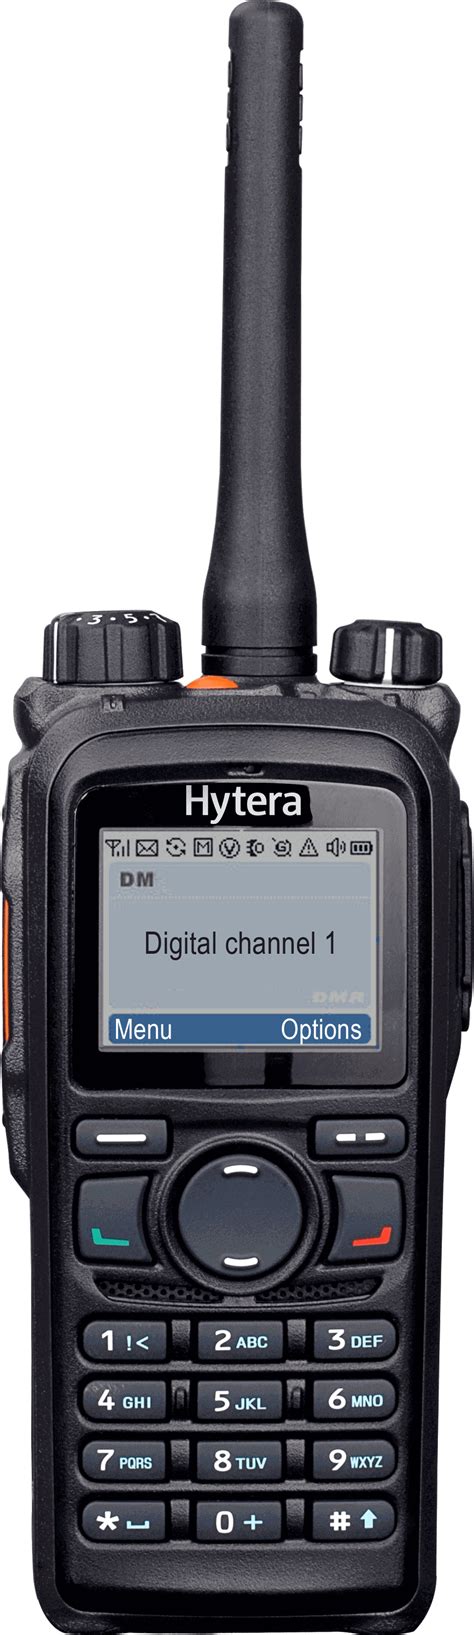 Hytera pd785 gif  Try checking the 32 or 64 characters box, then un-check the 10 characters box